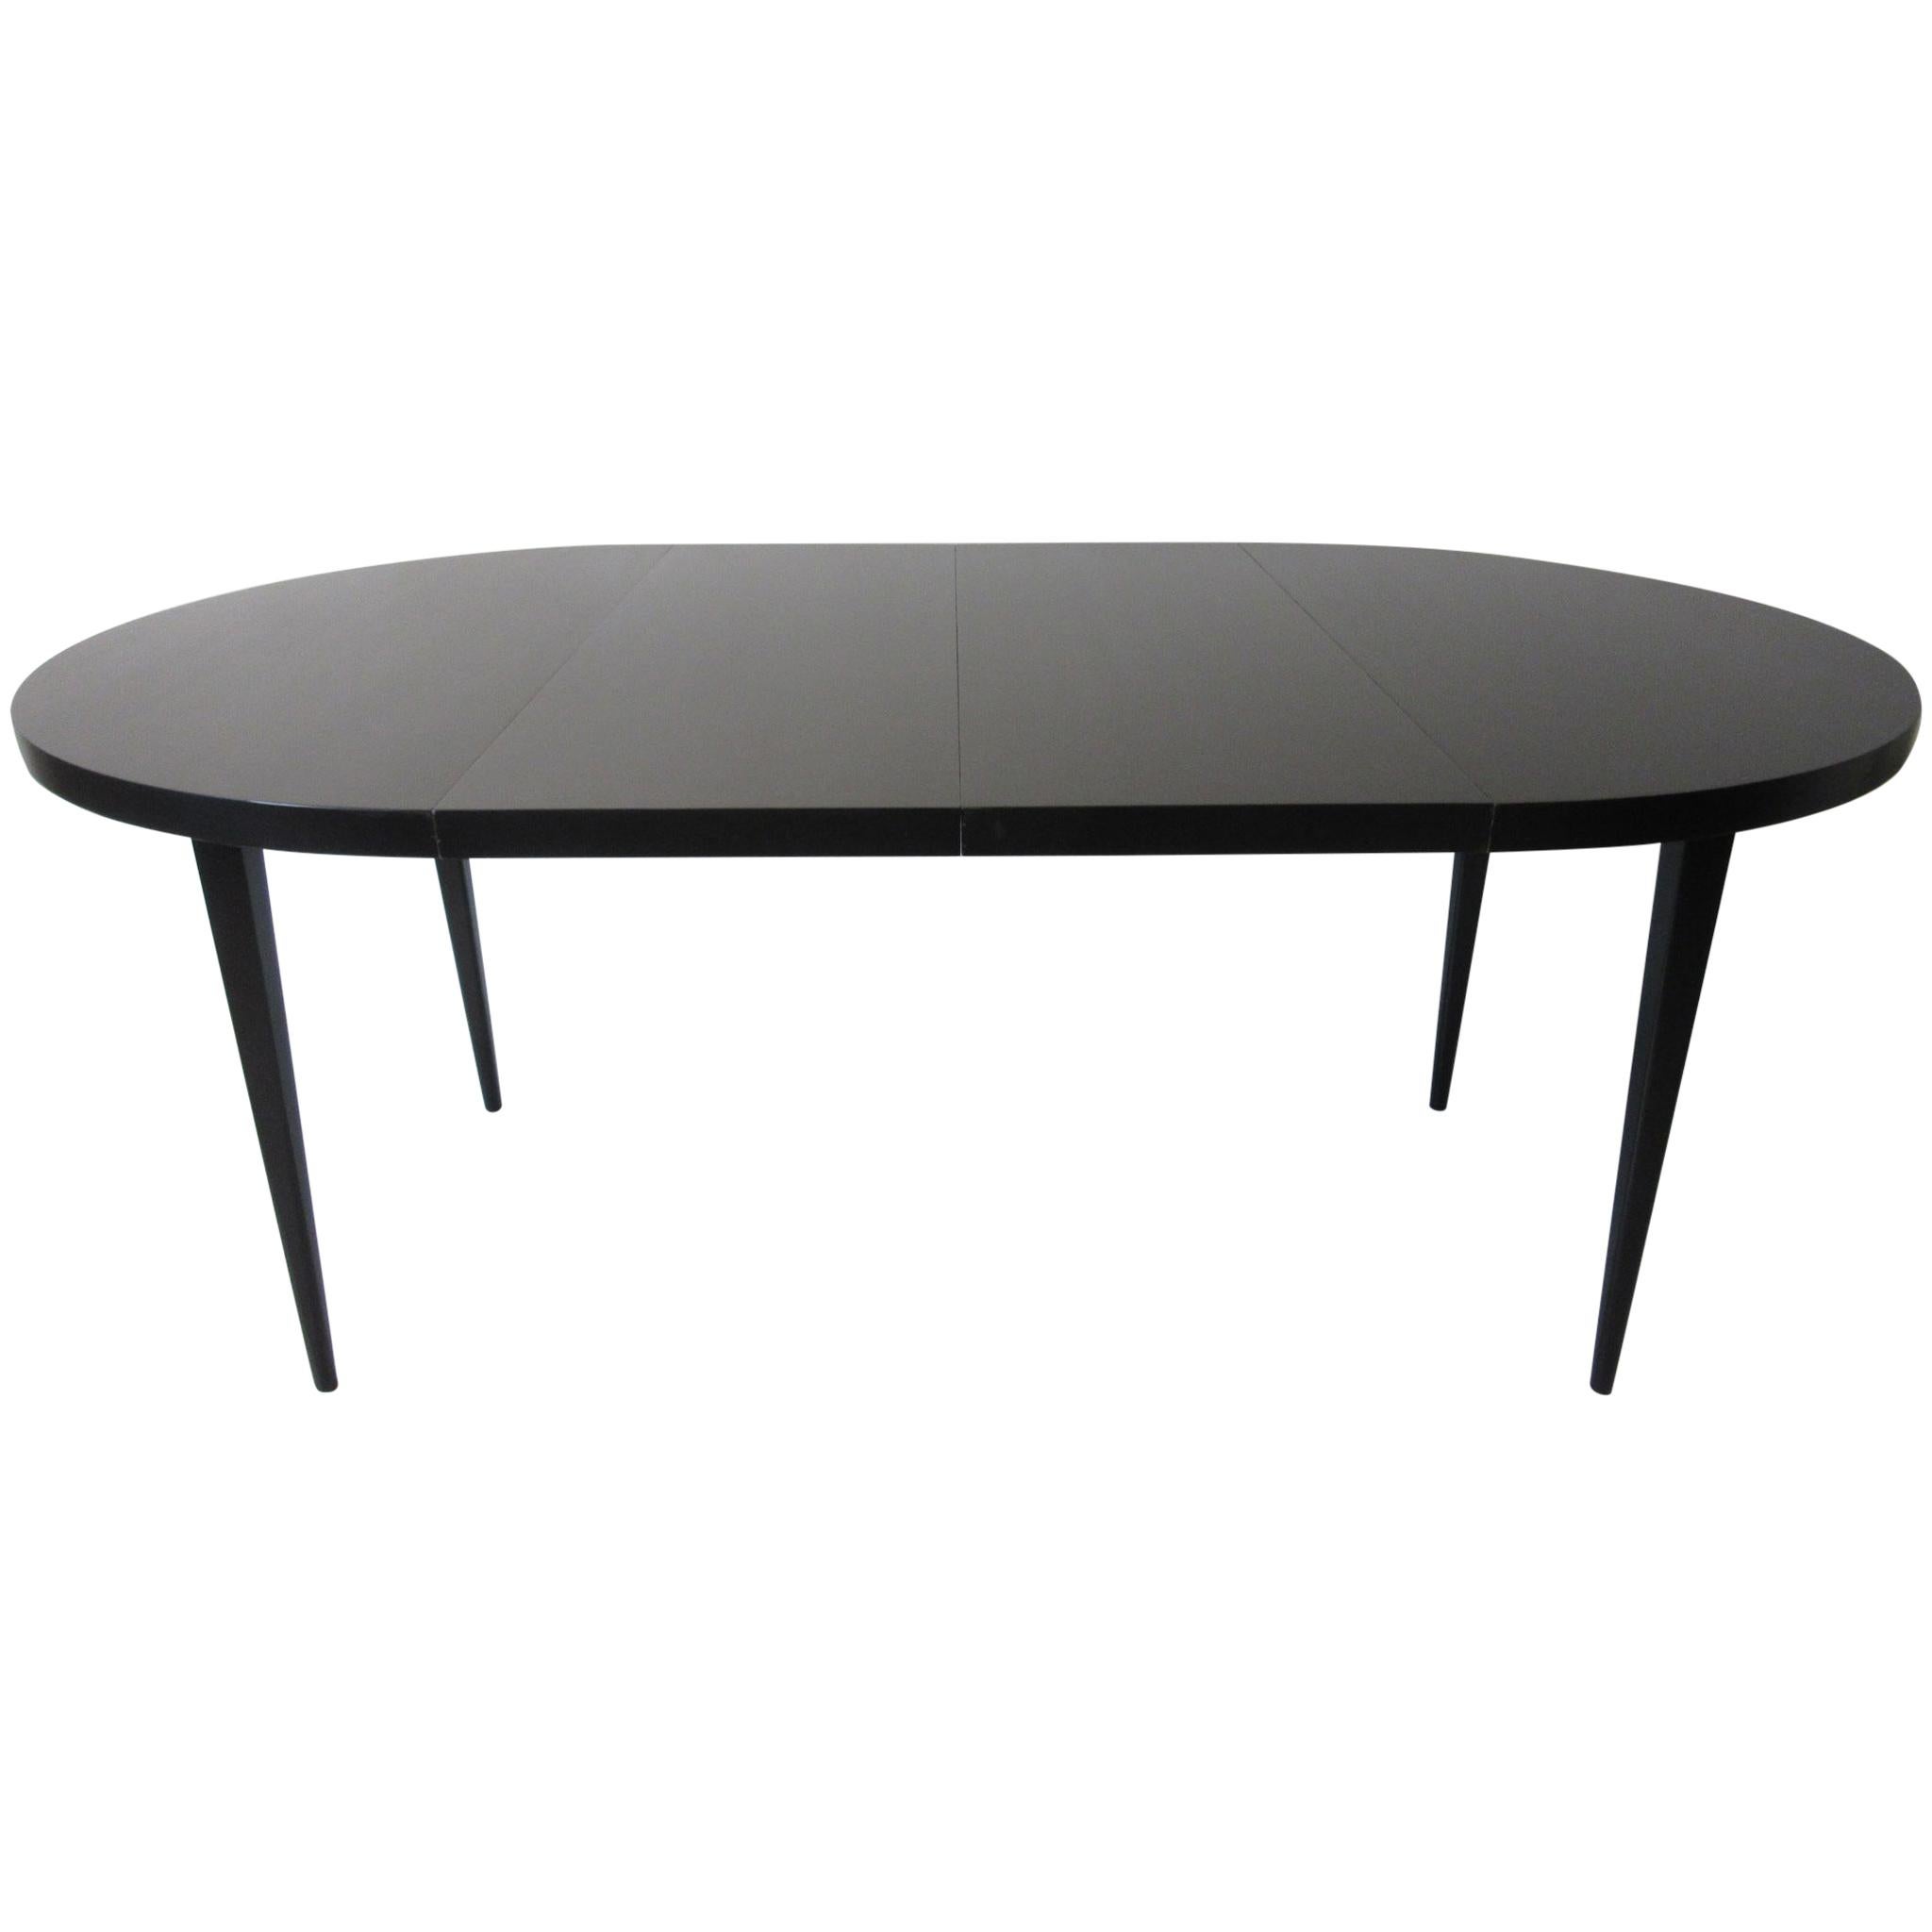 Paul McCobb Dining Table Planner Group